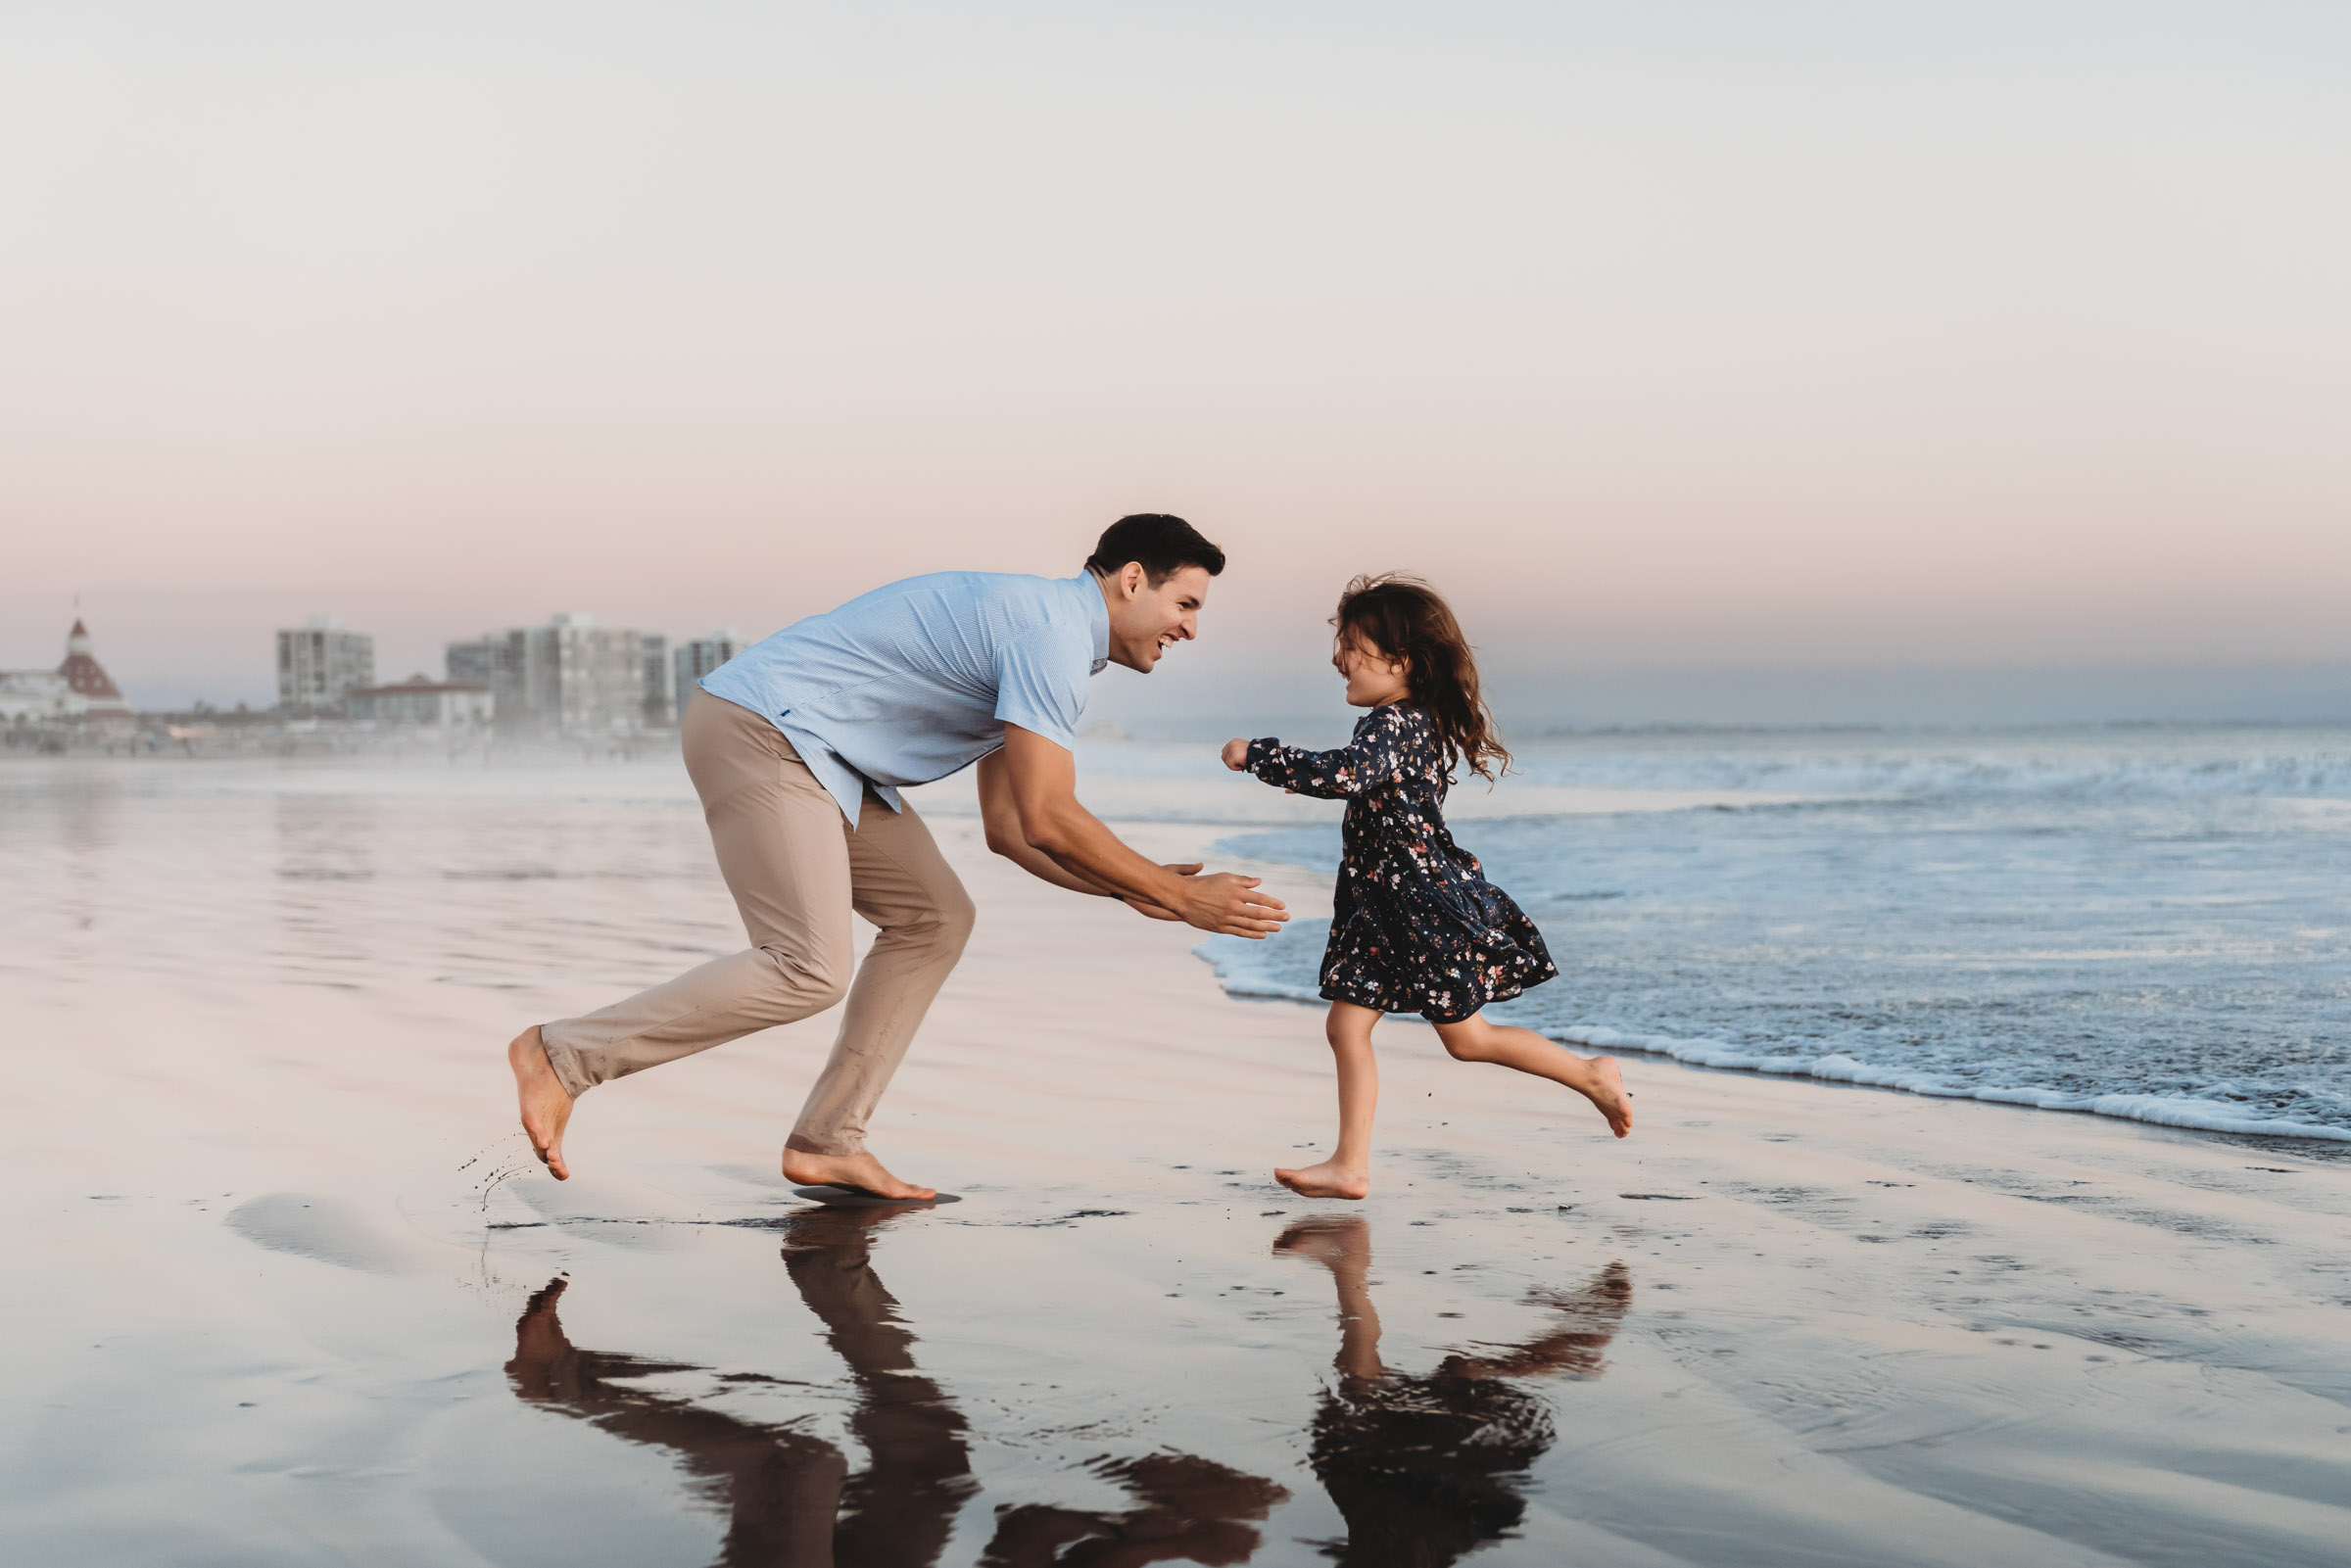 Daughter running into father's arms  during a lifestyle family photography session on Coronado Beach.